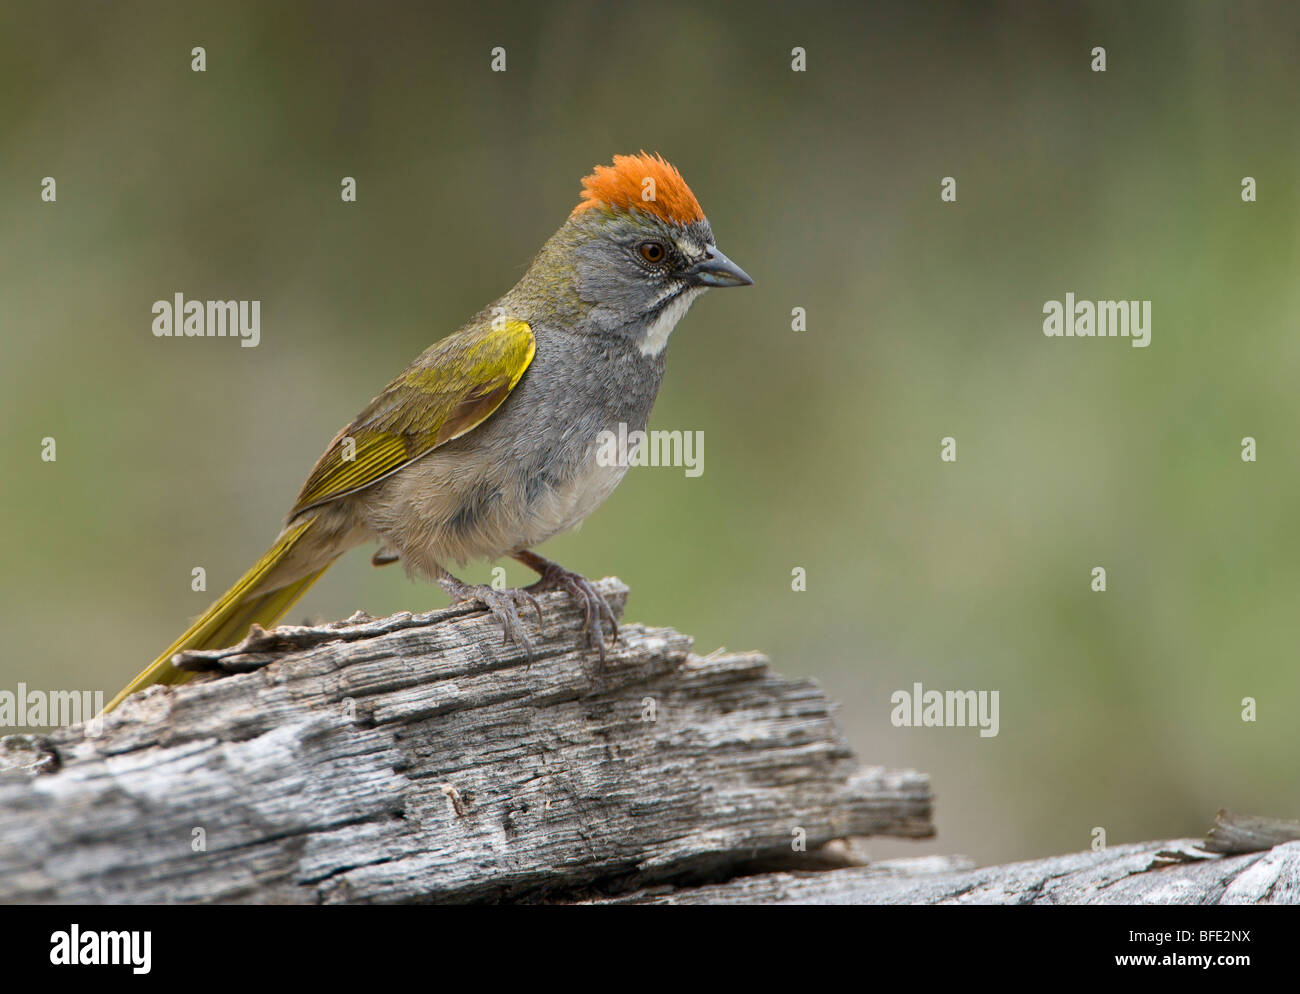 Green-tailed towhee (Pipilo chlorurus) perched on log in Deschutes National Forest, Oregon, USA Stock Photo